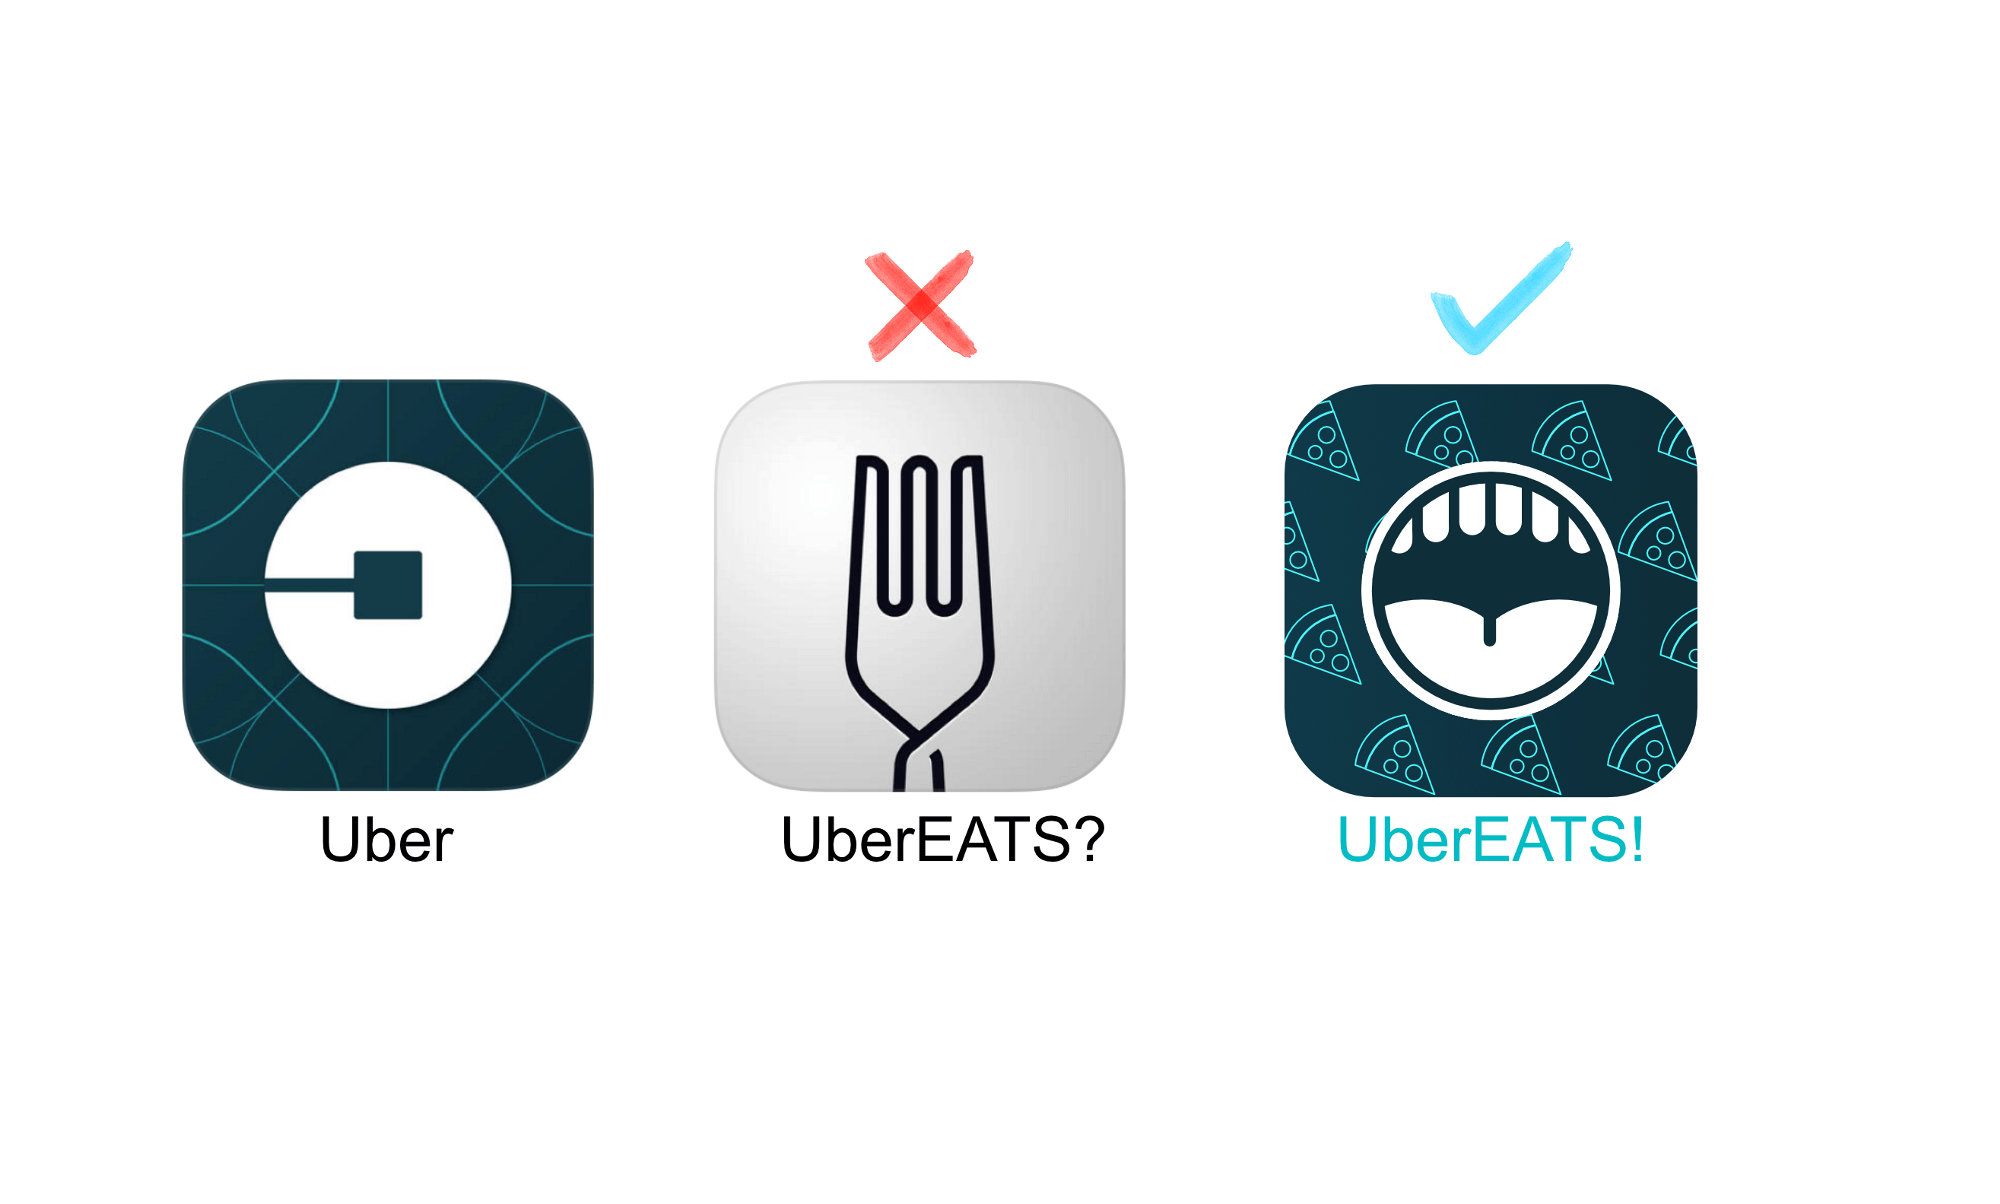 Uber Eats App Logo - Hey UBER, your UberEATS icon doesn't follow your new “bits and atoms